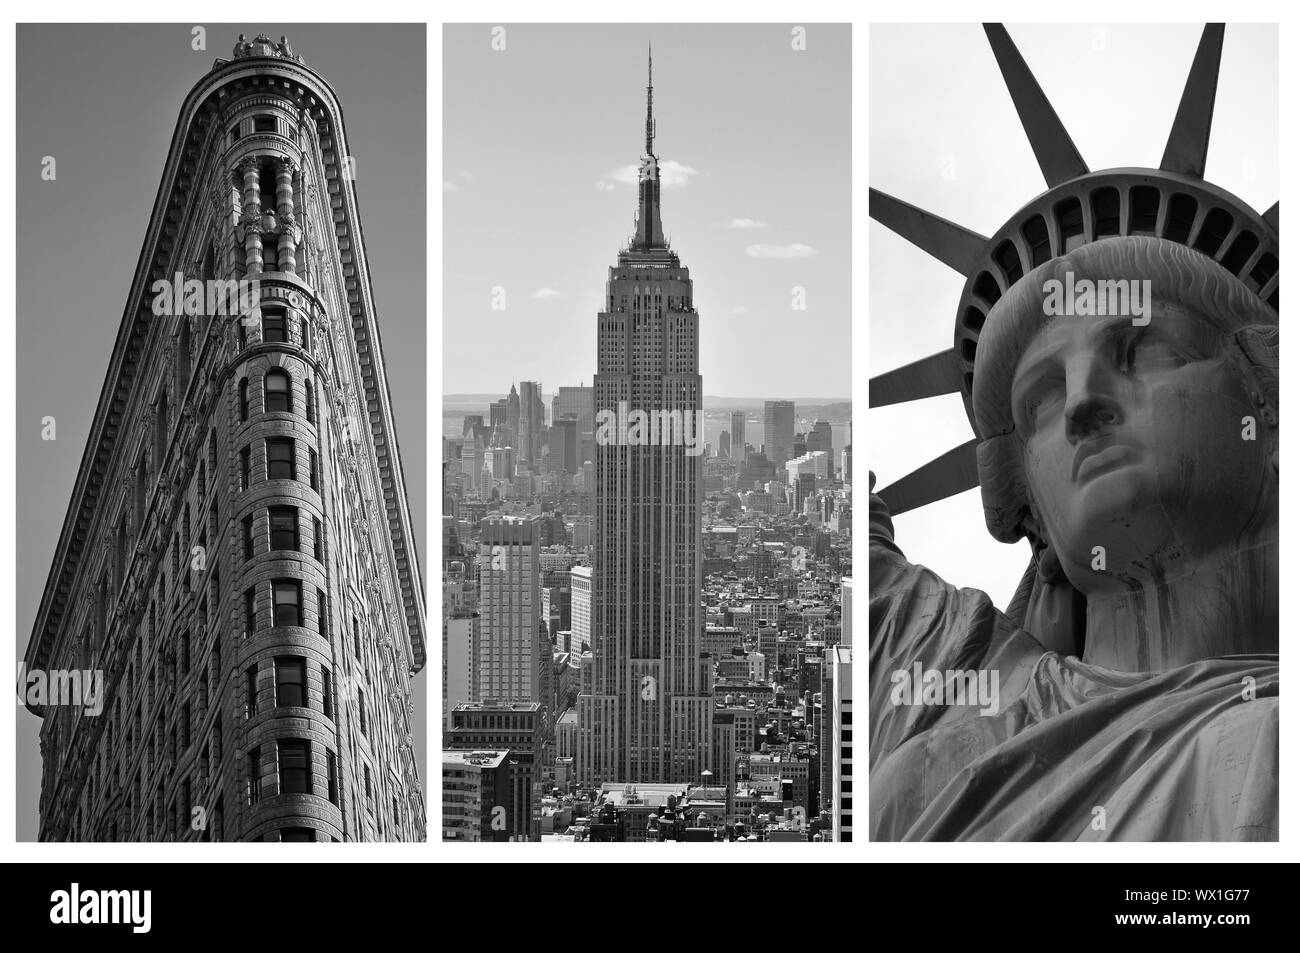 NEW YORK - SEPTEMBER 5: New York black and white triptych featuring the Flat Iron building, the Empire States Building and the Statue of Liberty, city Stock Photo